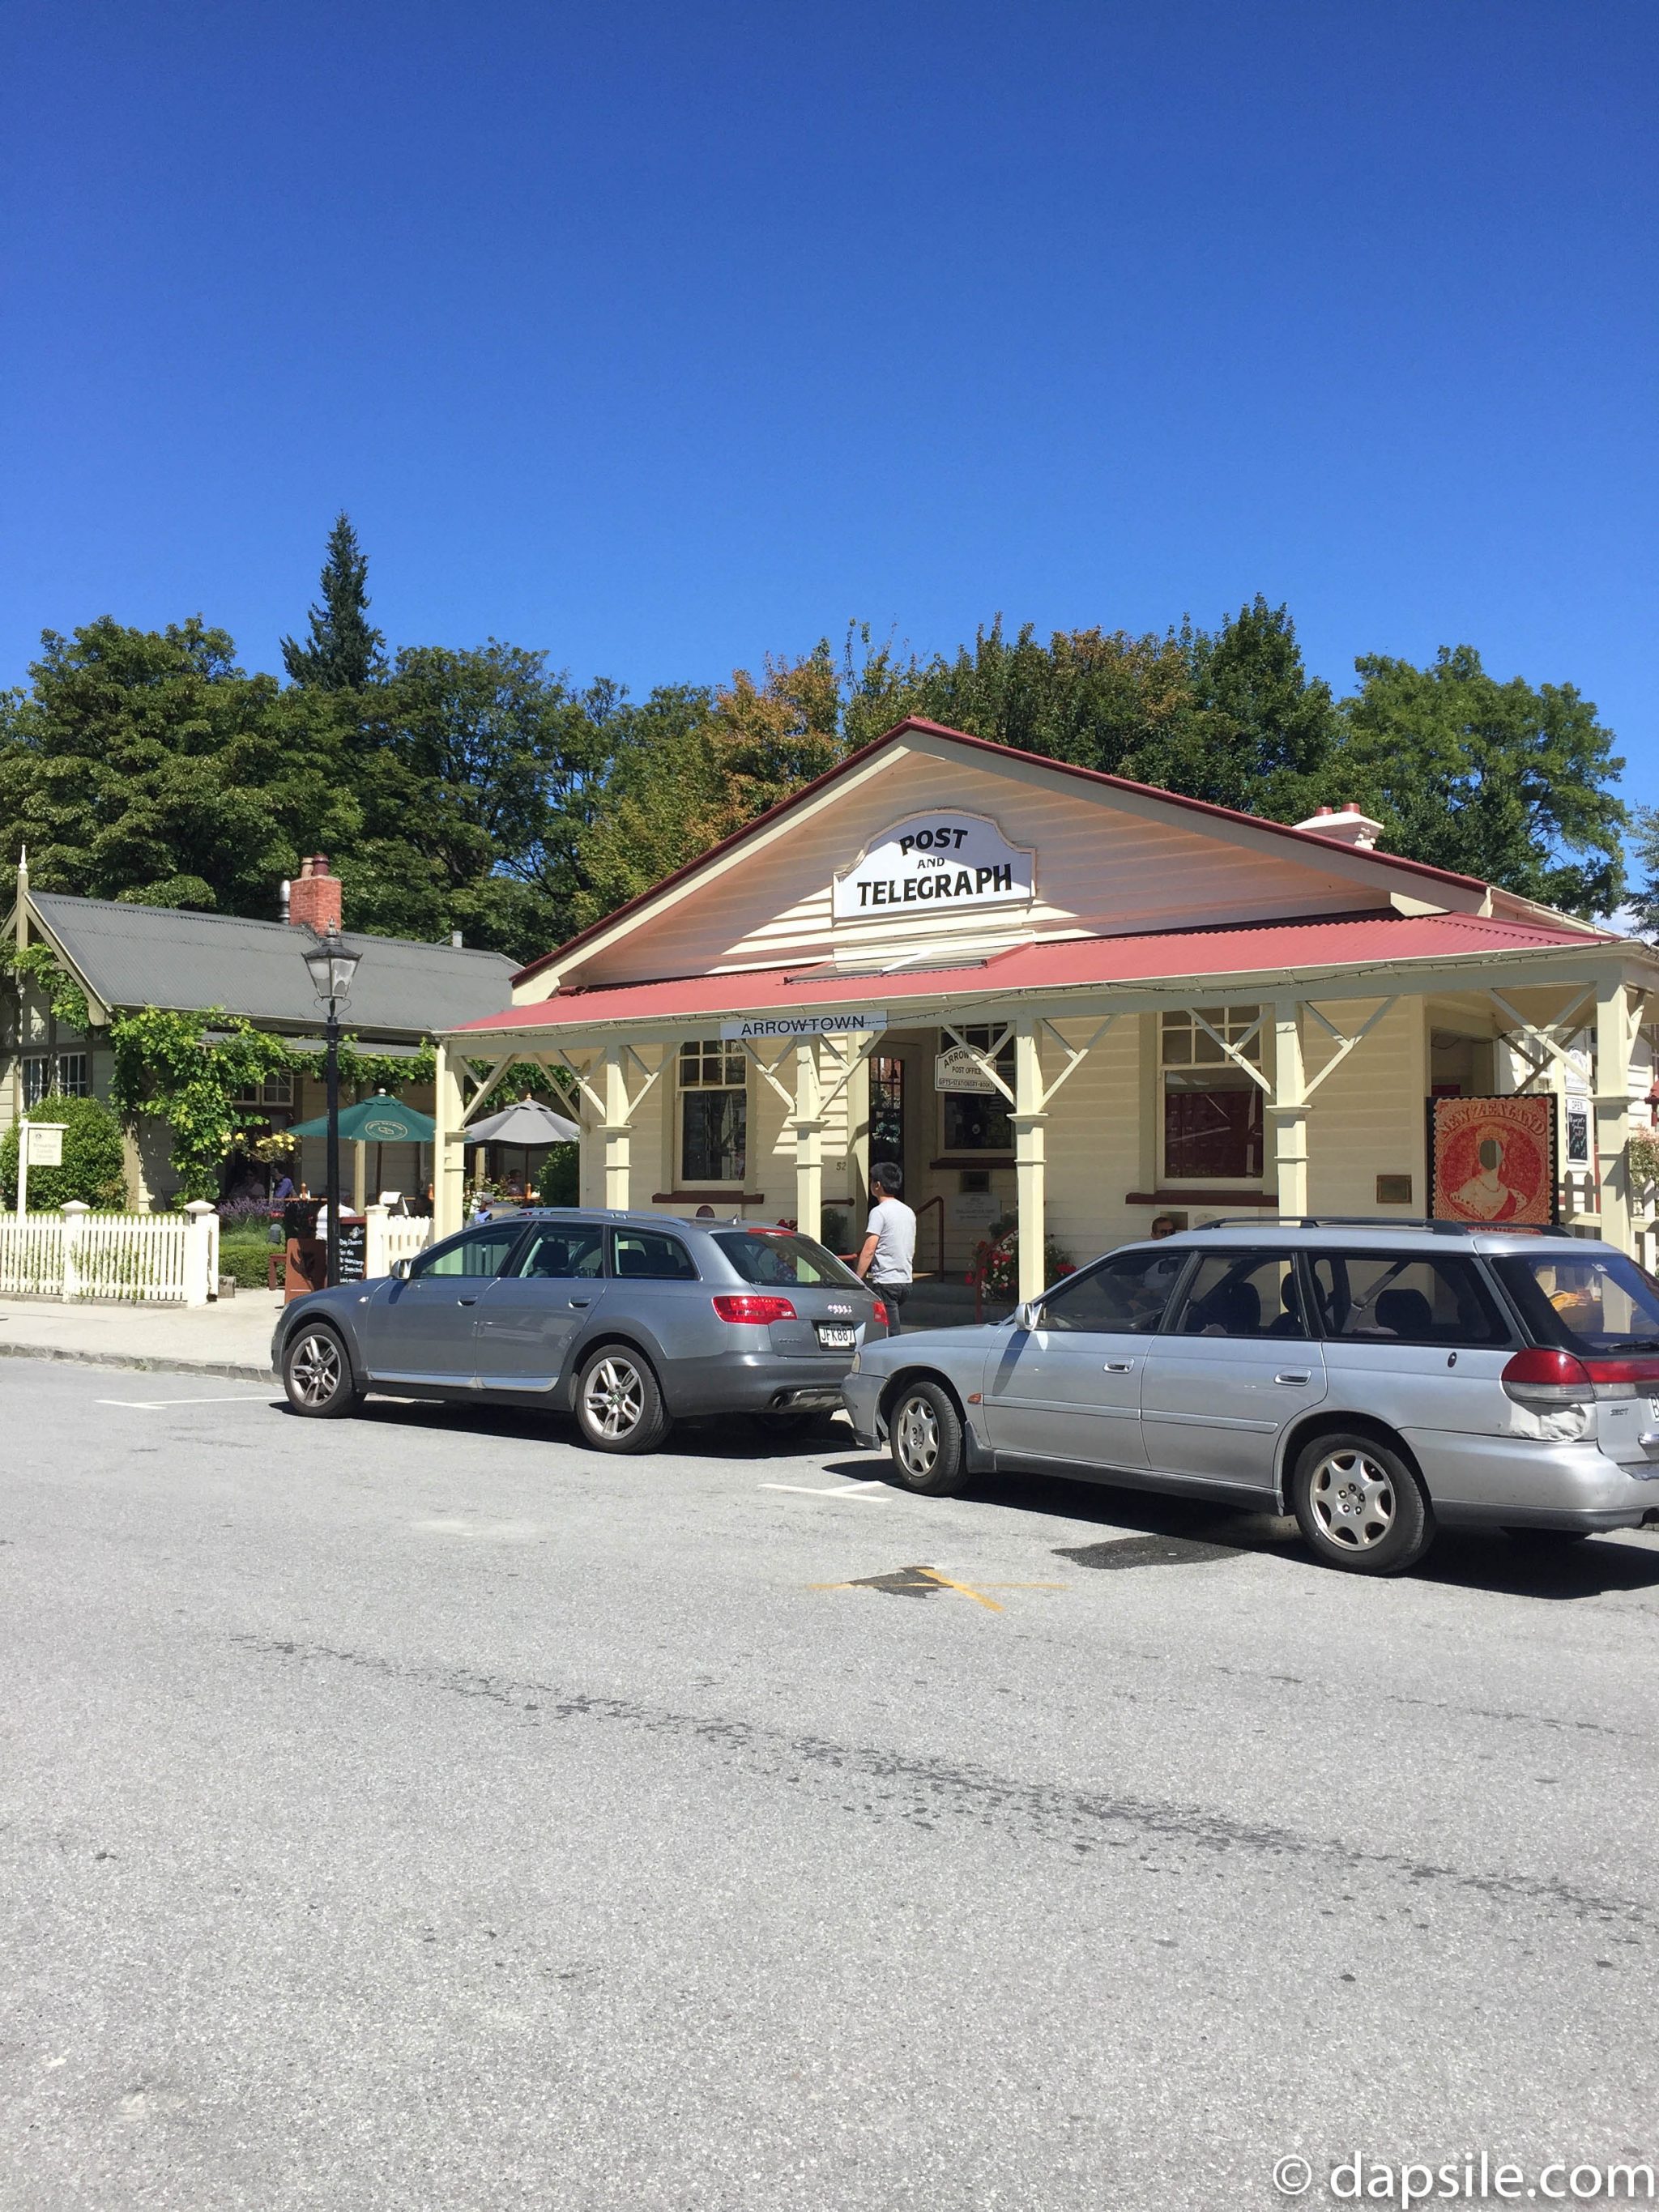 cars parked in front of the Arrowtown post office located in a historical building